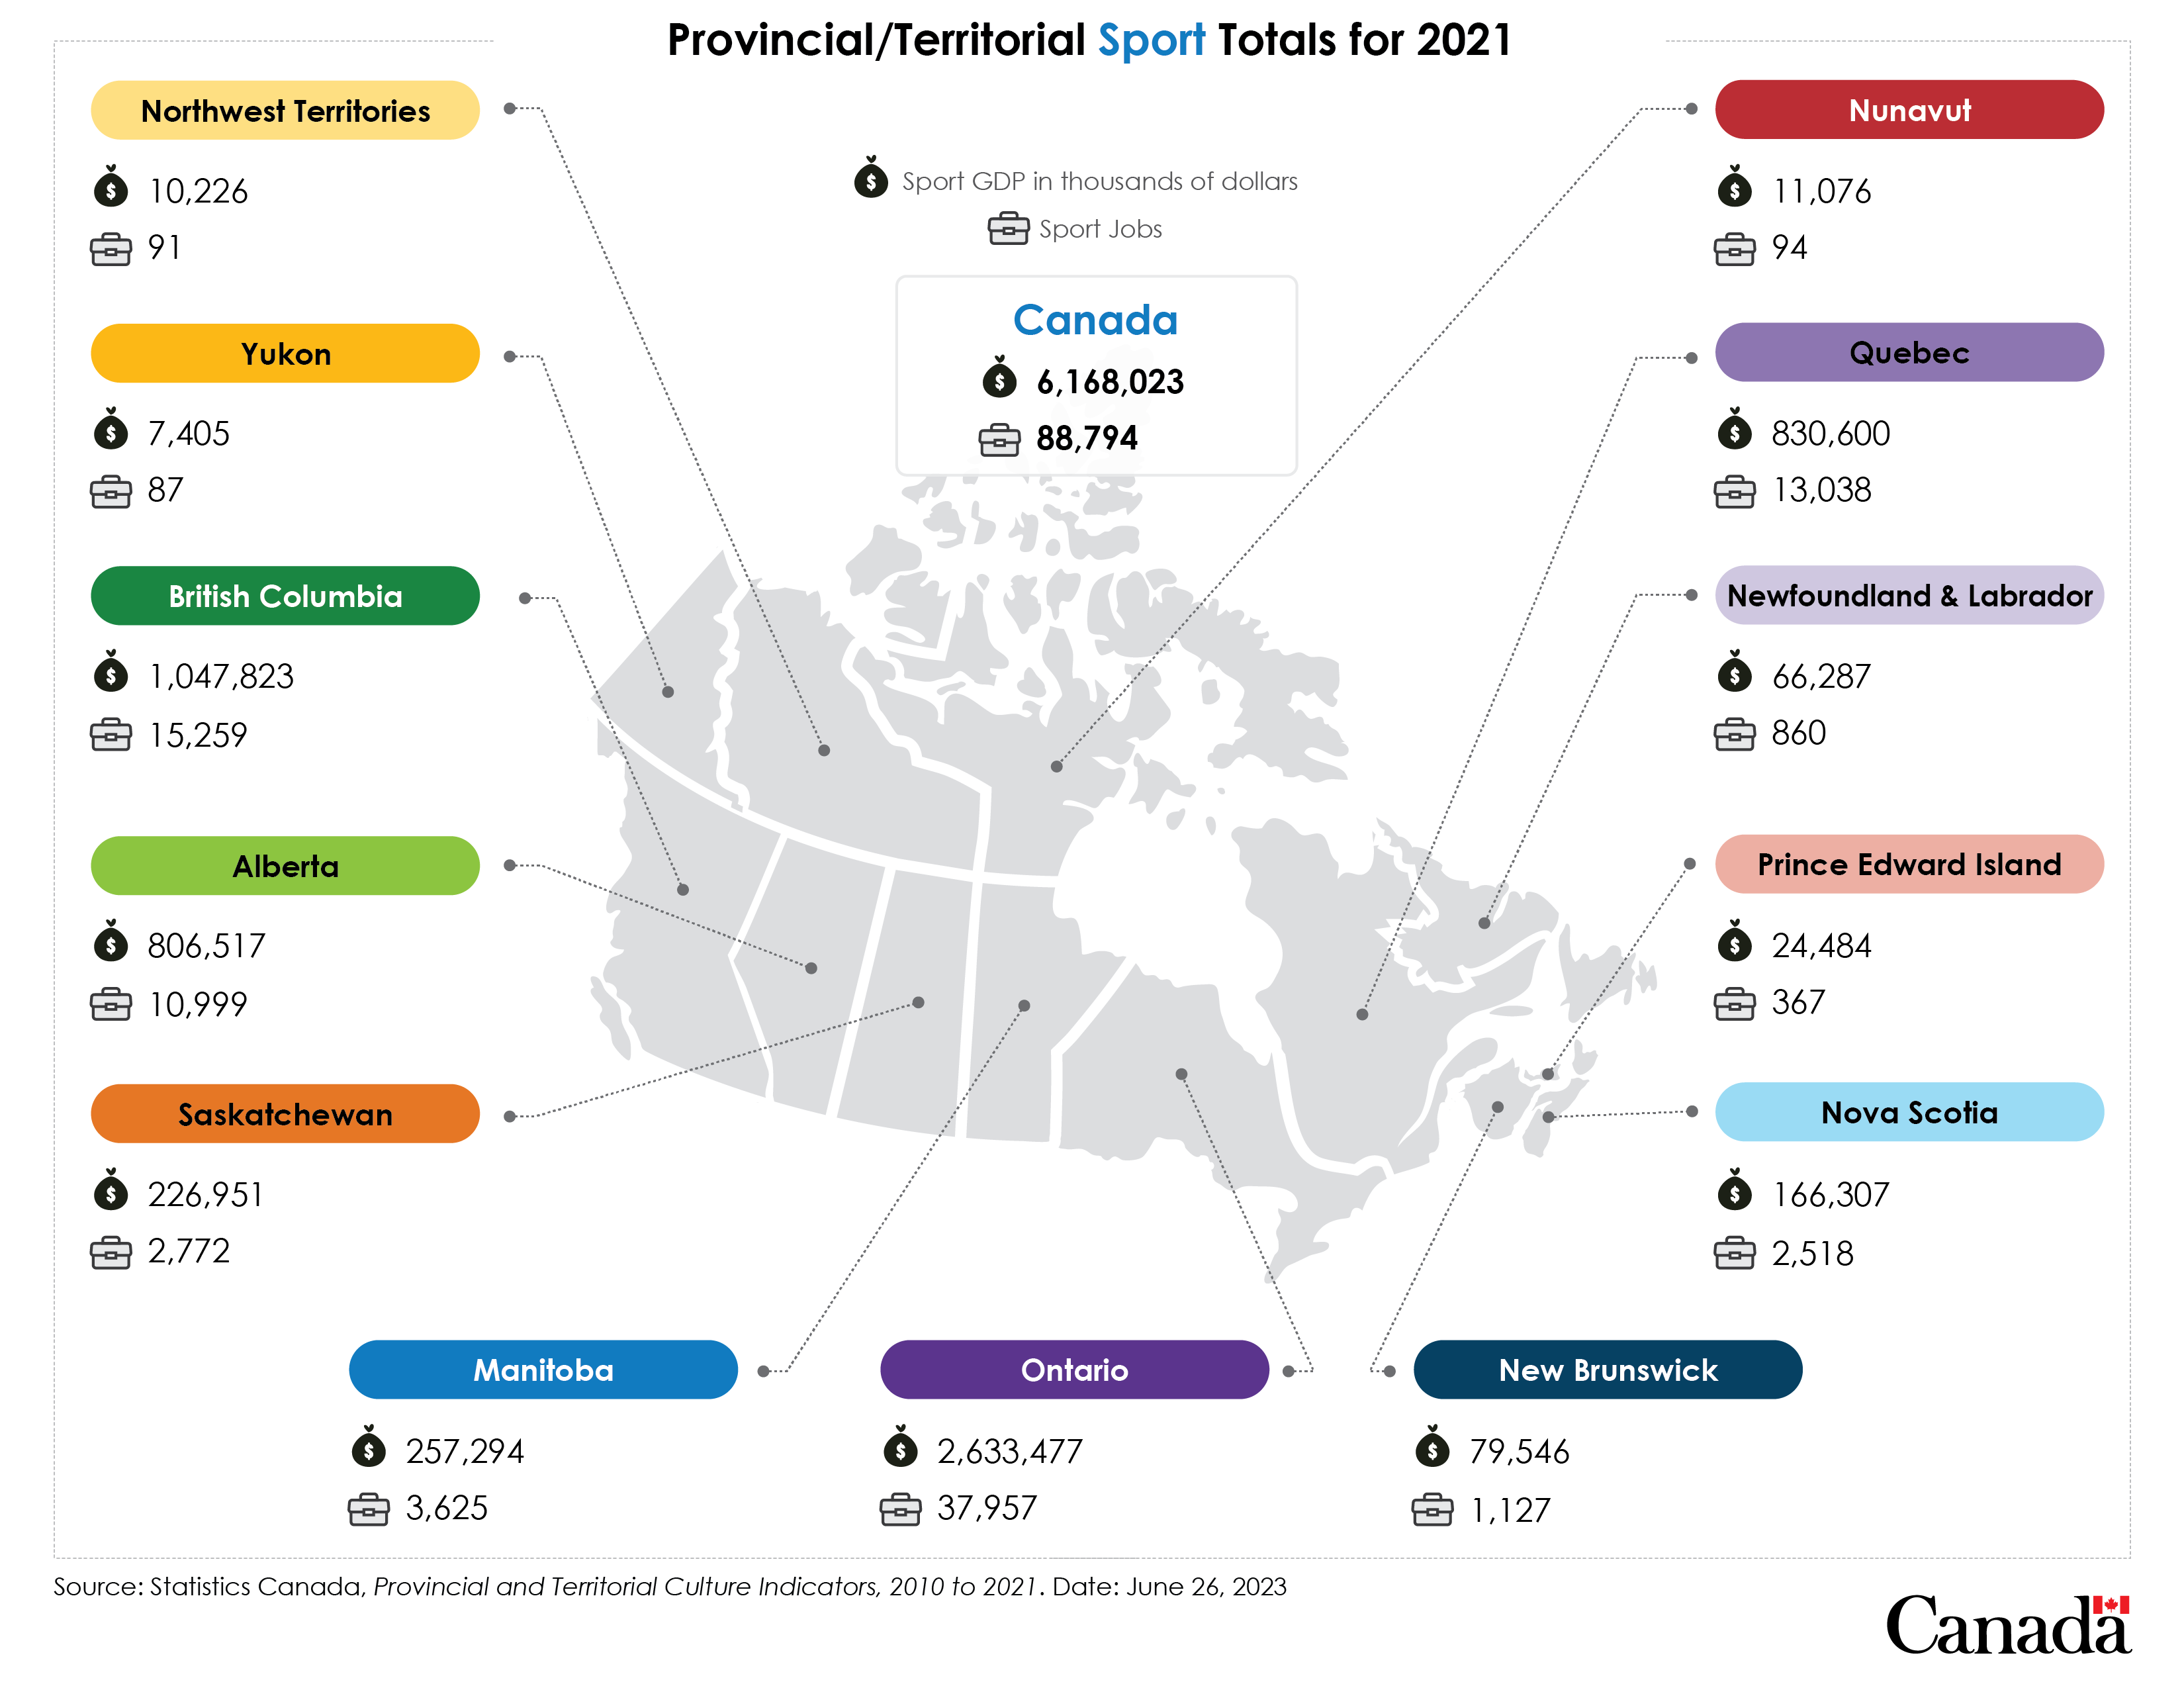 Infographic of Provincial/Territorial Sport Totals for 2021